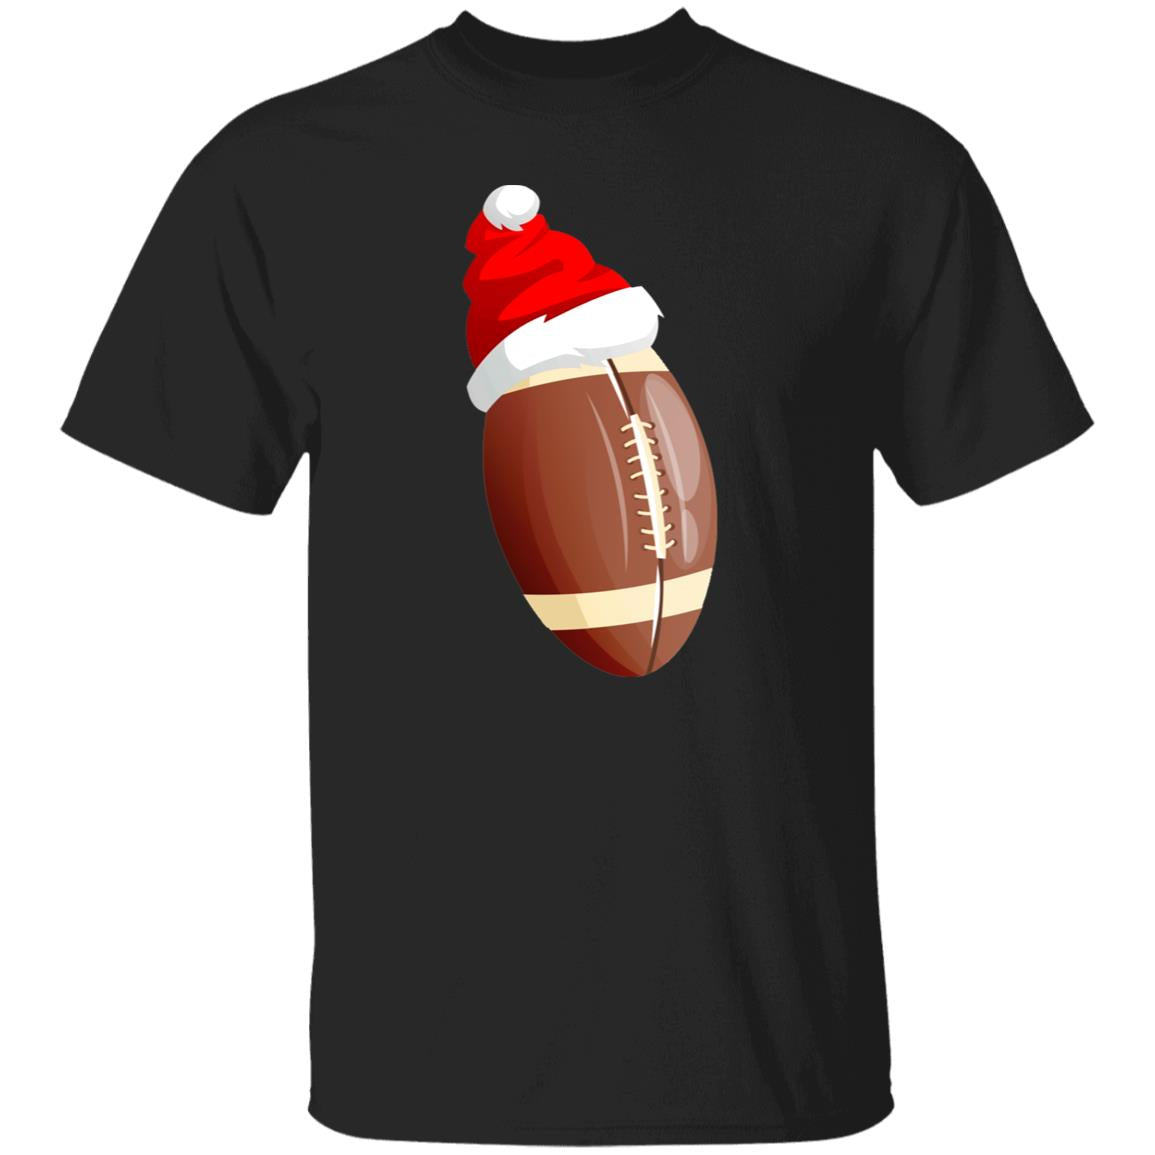 American football Christmas Unisex shirt rugby Holiday tee Black Dark Heather-Family-Gift-Planet